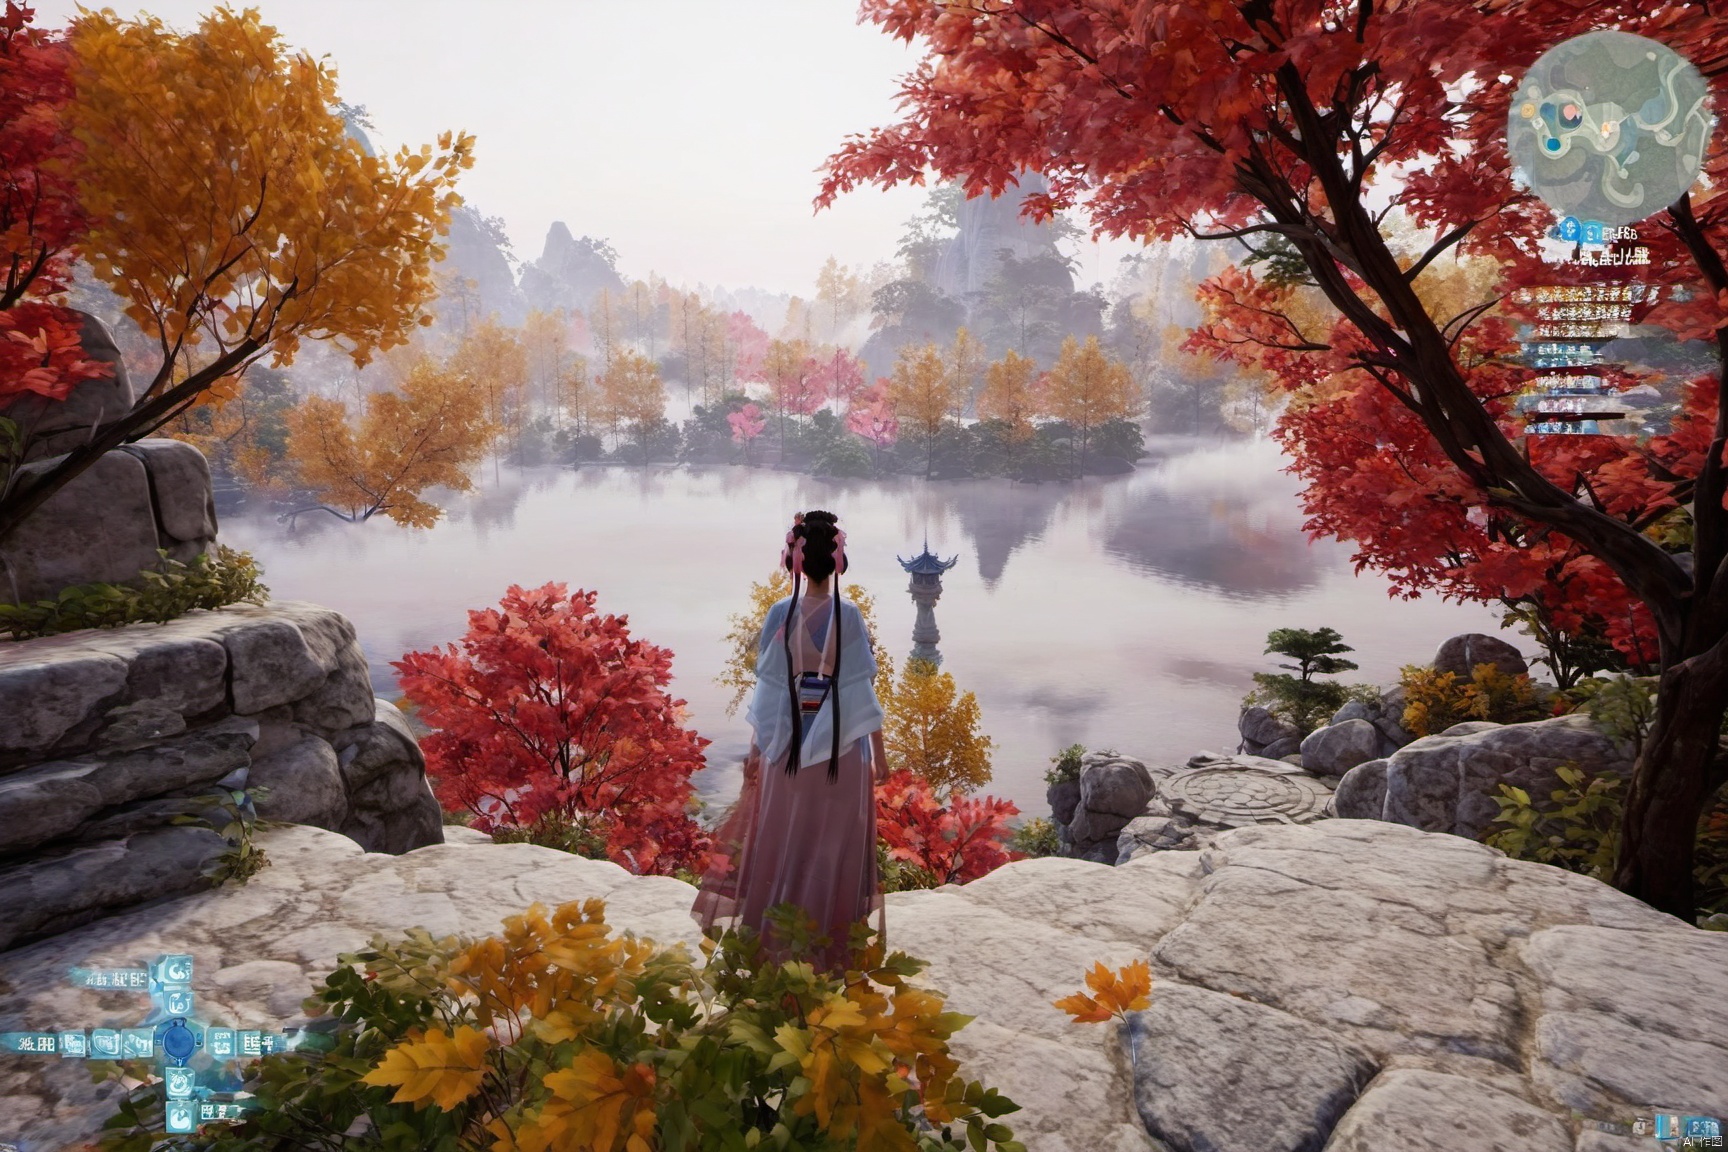  RPG,Trees, red leaves, maple trees, maple leaves, cliff edge, a girl, white clothes, pink ribbon, long skirt, back to the audience, third person perspective, stones, pavilions, lakes, mist, West Lake architecture, yellow trees, mountains,health bar, user interface